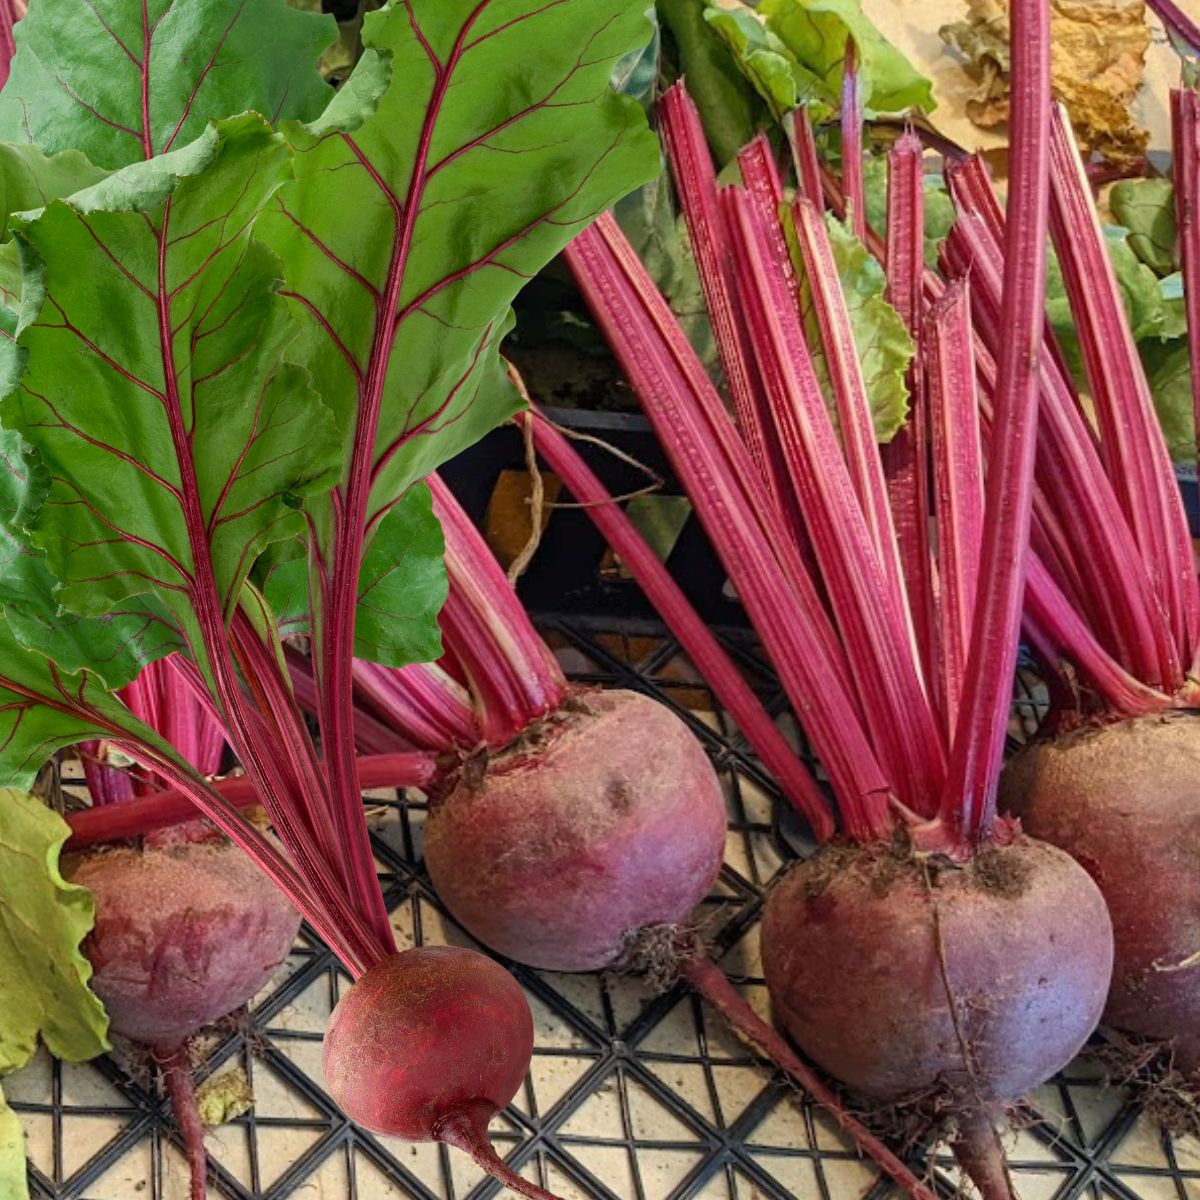 fresh beets in a basket.